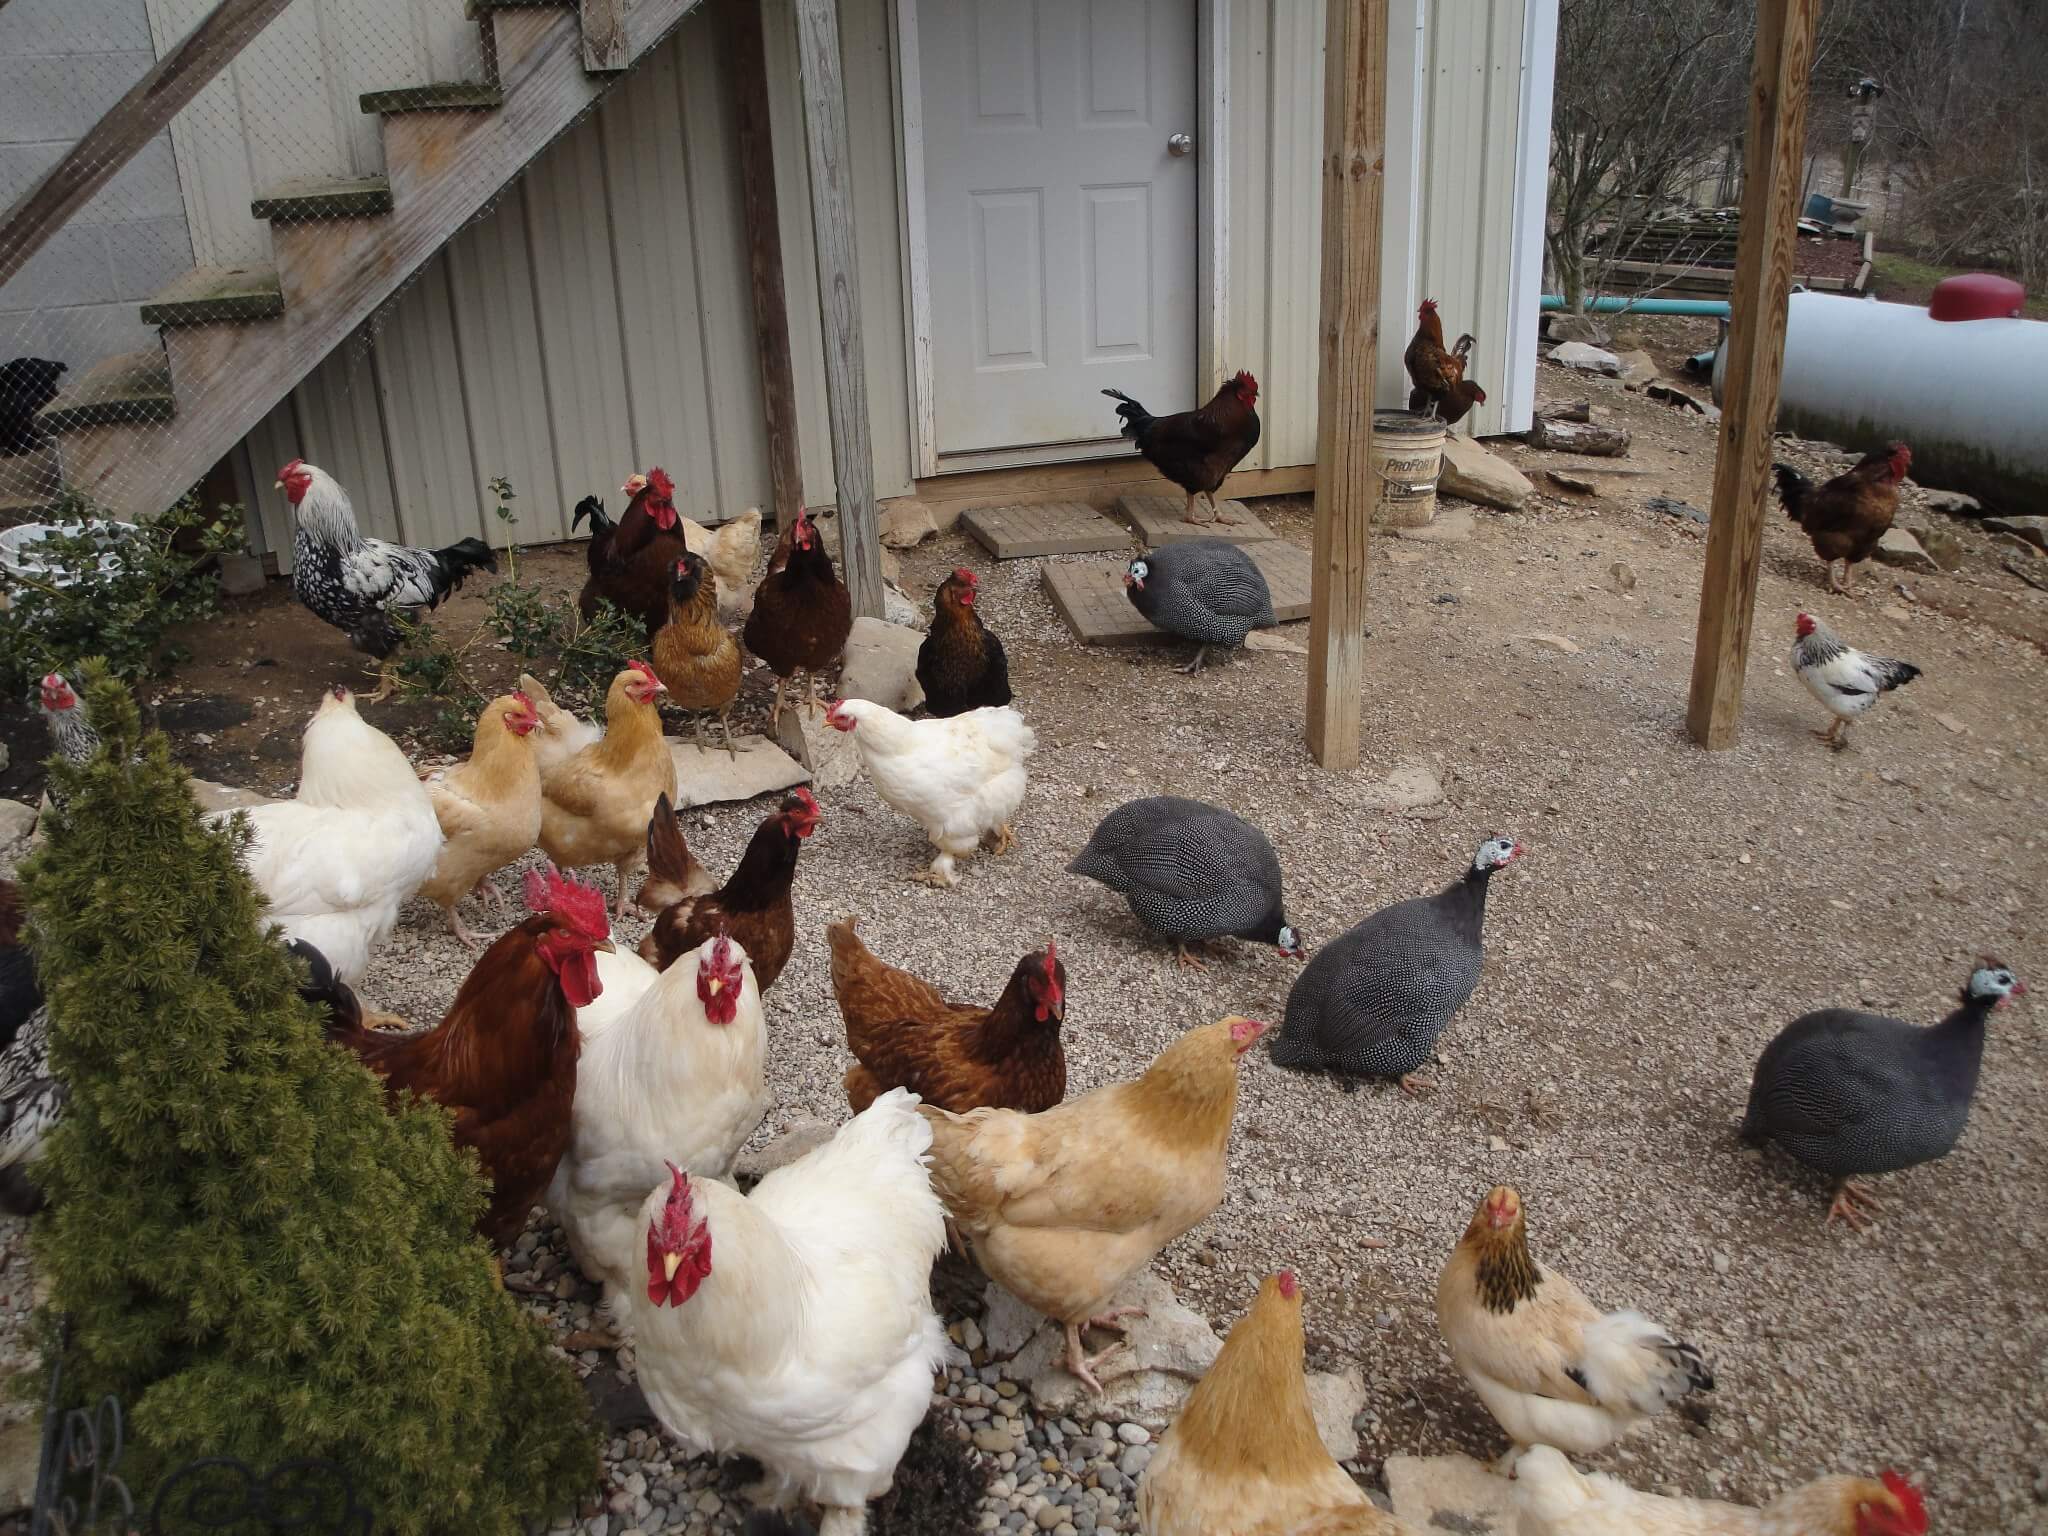 Chickens and Ginnies gather outside of their coop